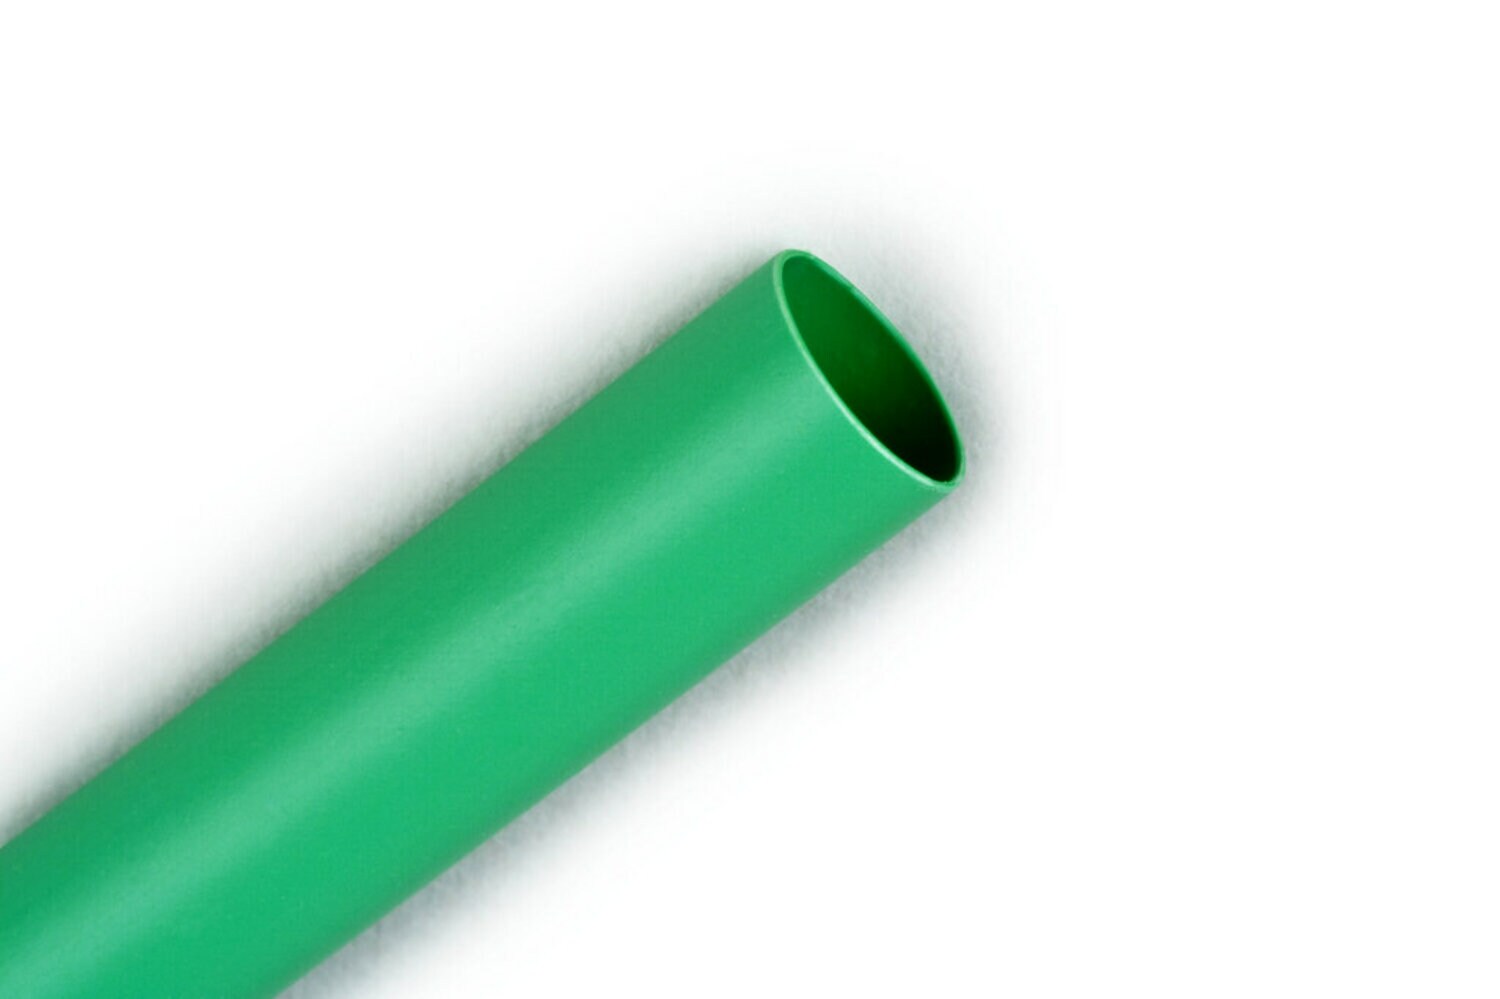 7010305749 - 3M Heat Shrink Thin-Wall Tubing FP-301-3/32-48"-Green-250 Pcs, 48 in
Length sticks, 250 pieces/case